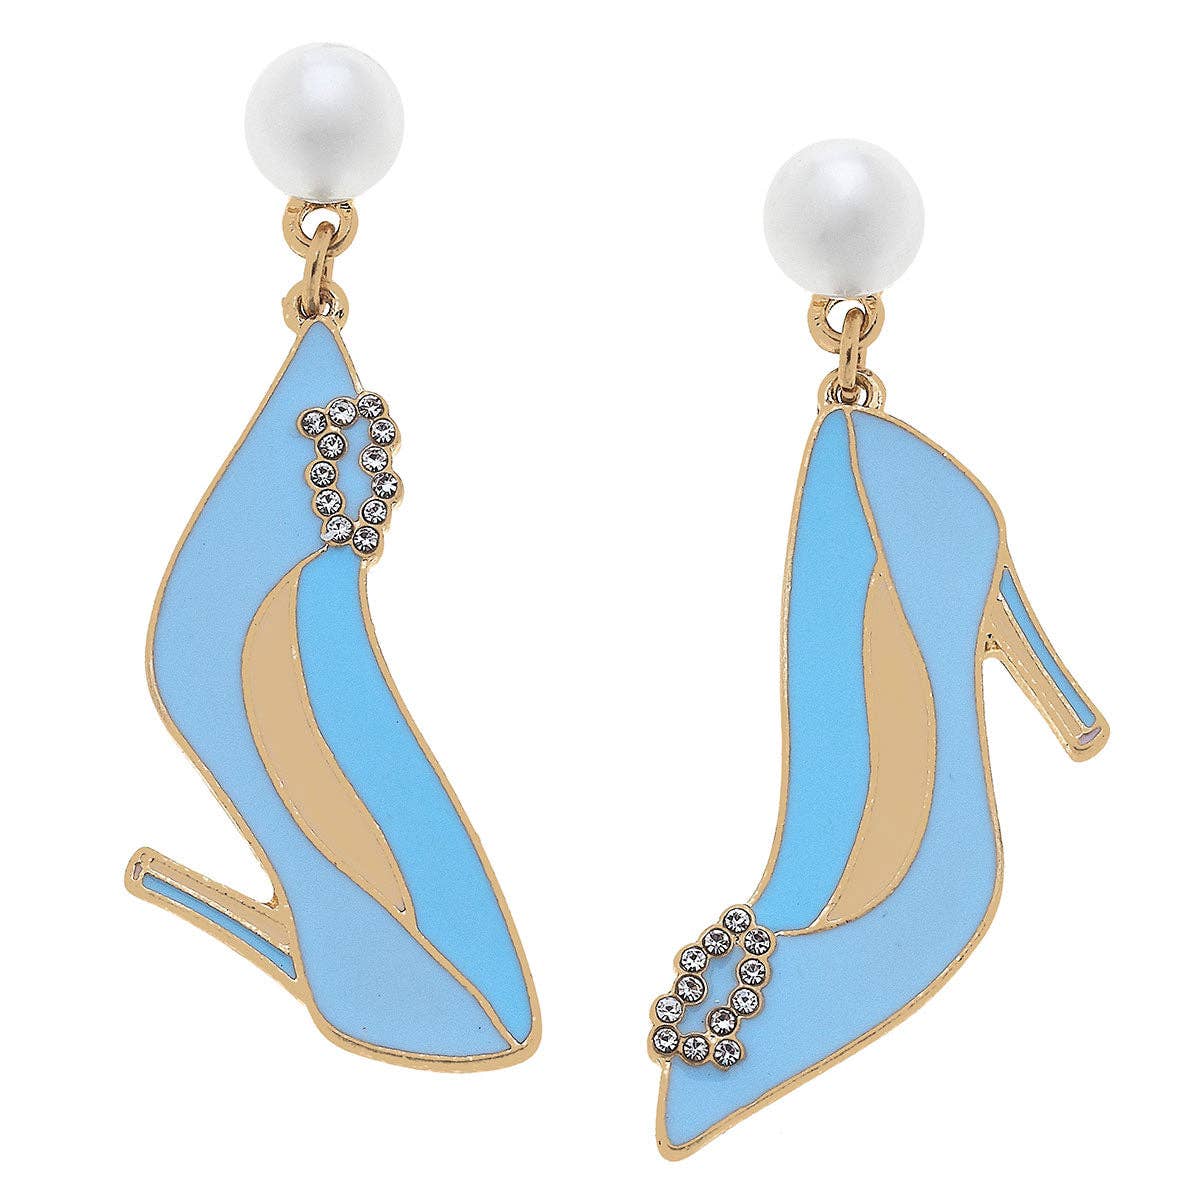 Carrie Enamel & Pave Wedding Pumps in Blue & White